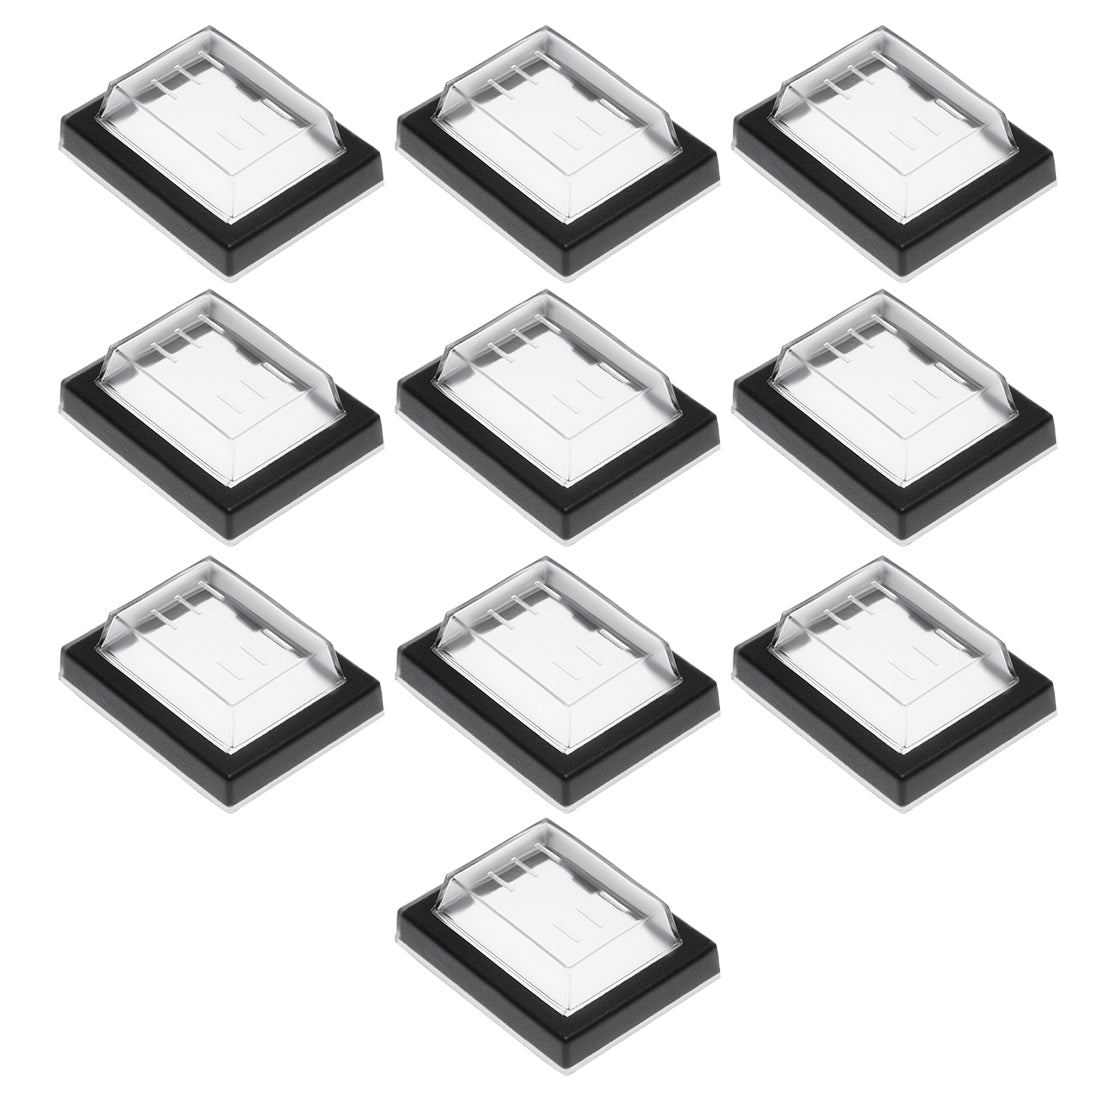 uxcell Uxcell 10 pcs Waterproof Case Switch Covers Caps Protectors Clear Black Rectangle Splash for Boat Rocker Switch